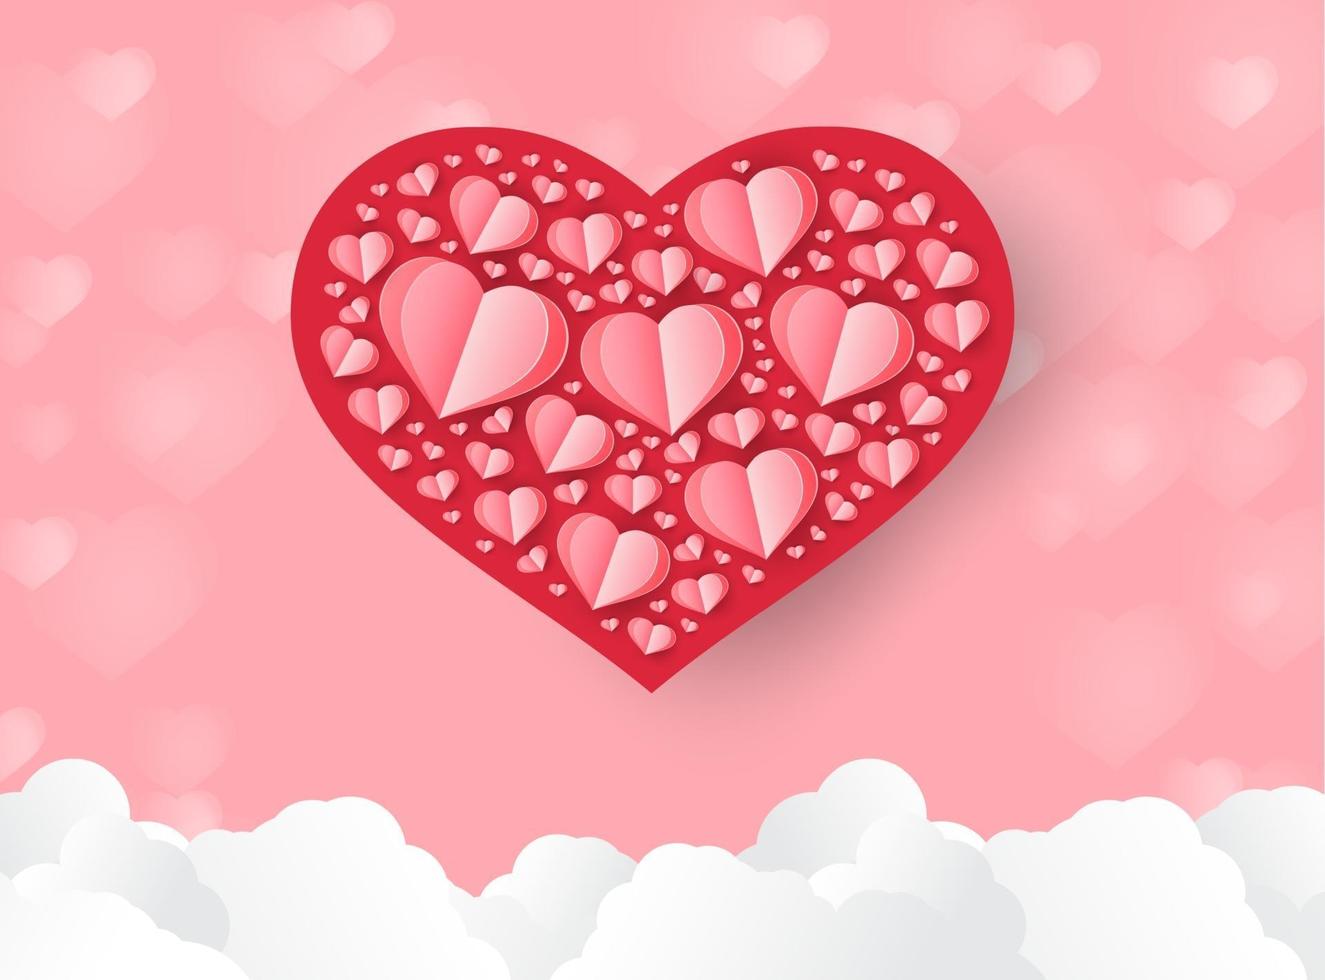 heart shape. paper art style. valentine day vector